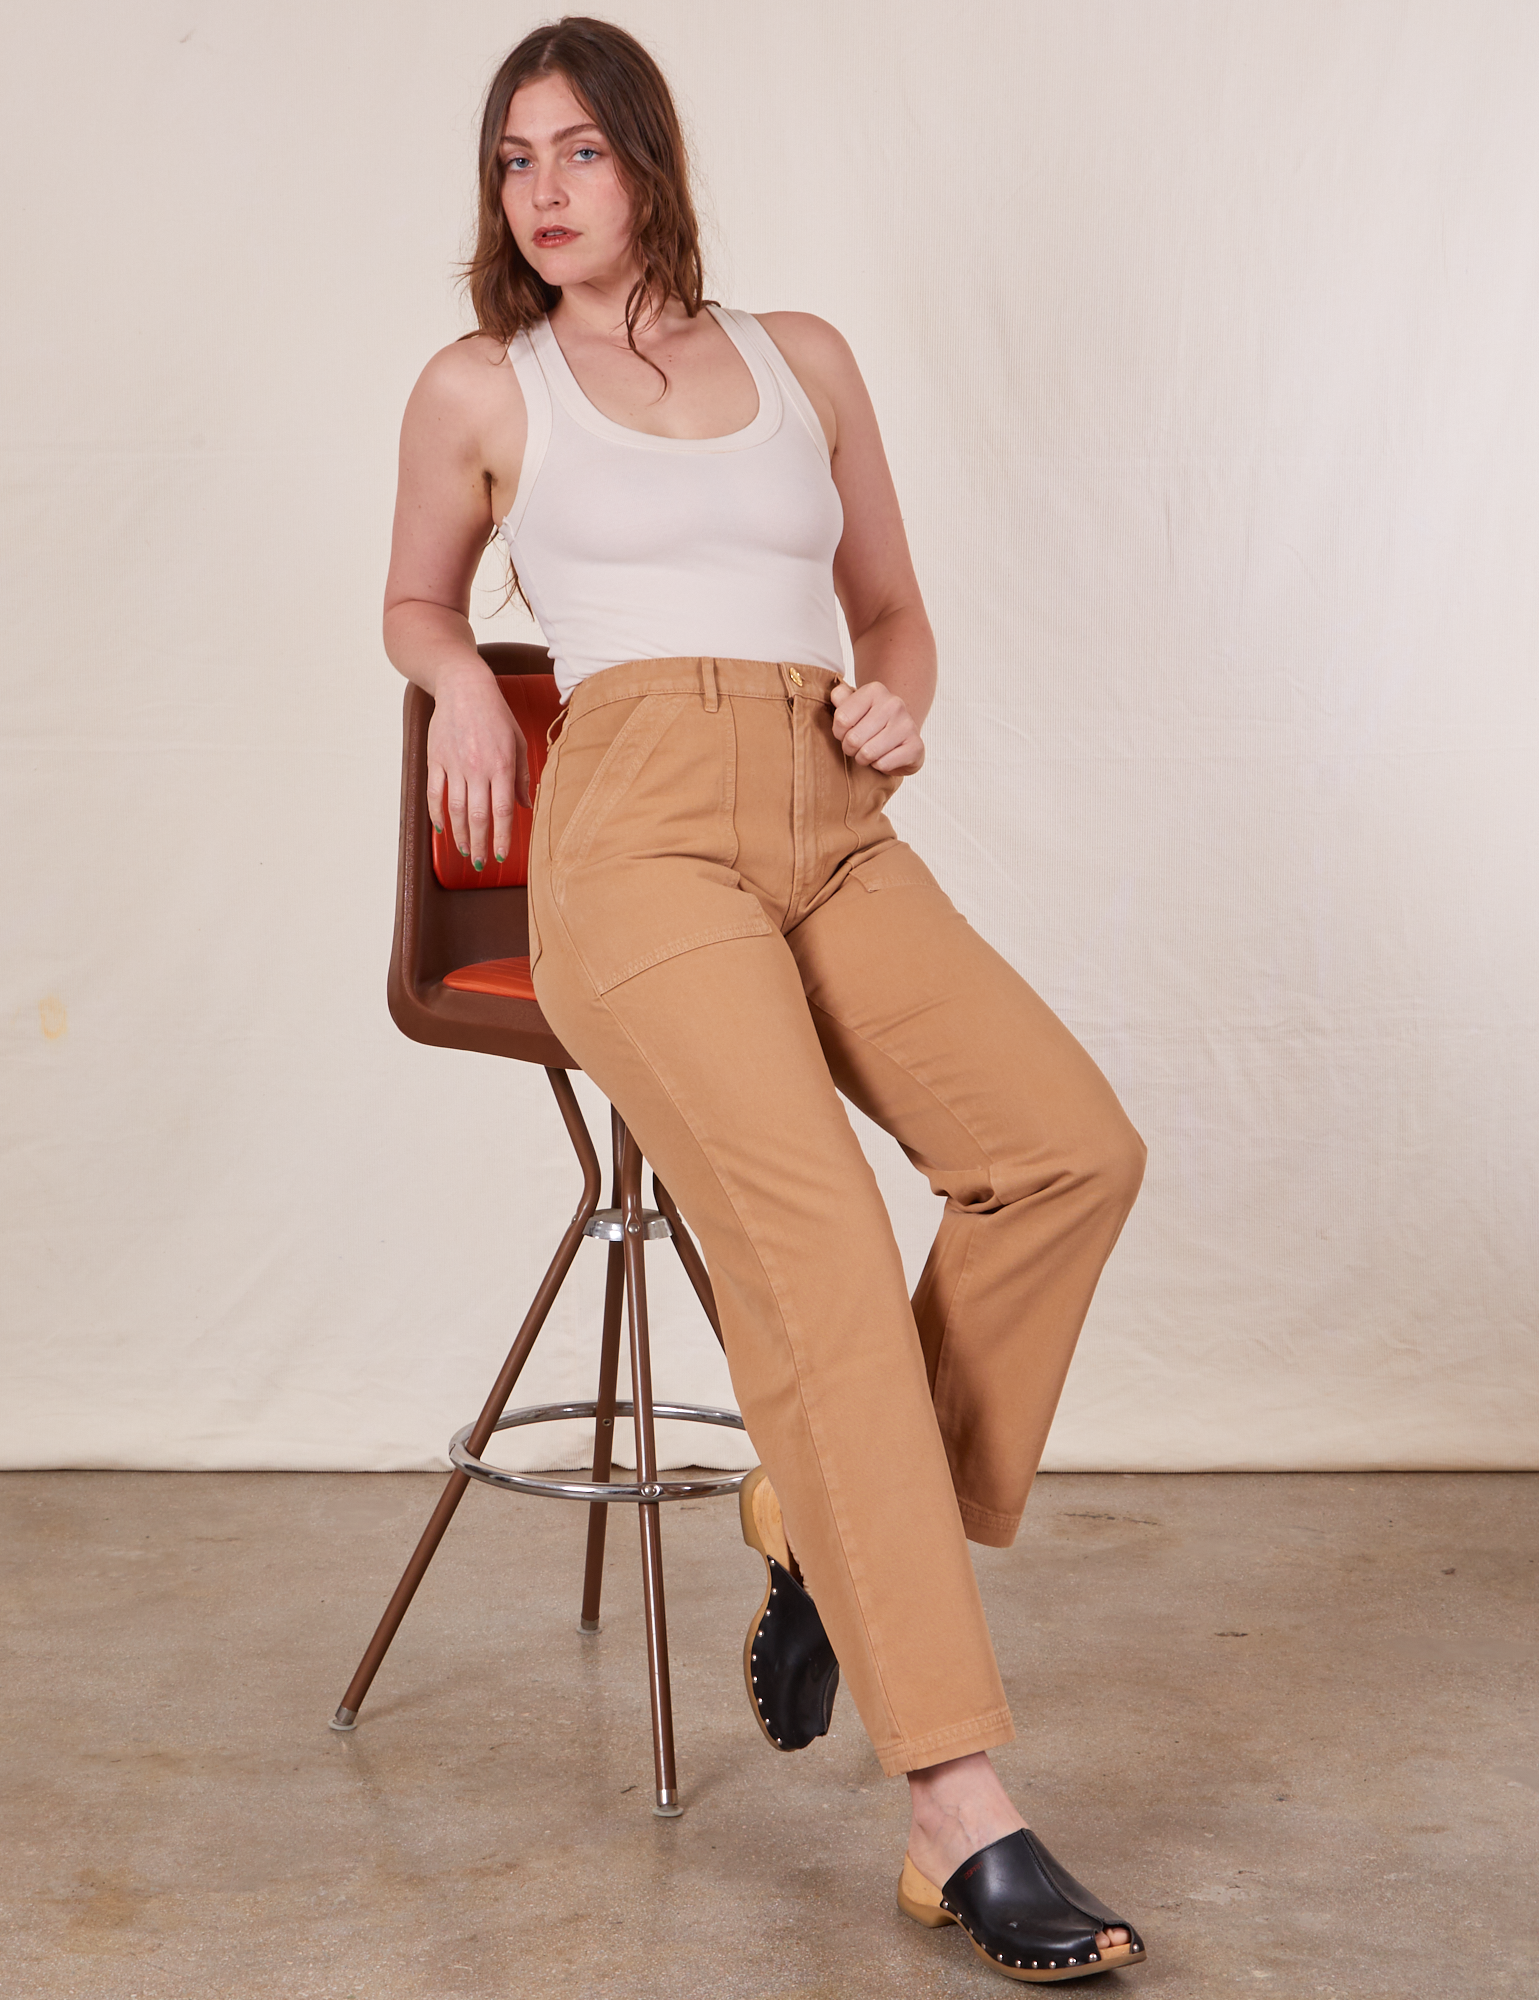 Allison is 5&#39;10&quot; and wearing S Long Work Pants in Tan and Tank Top in vintage tee off-white